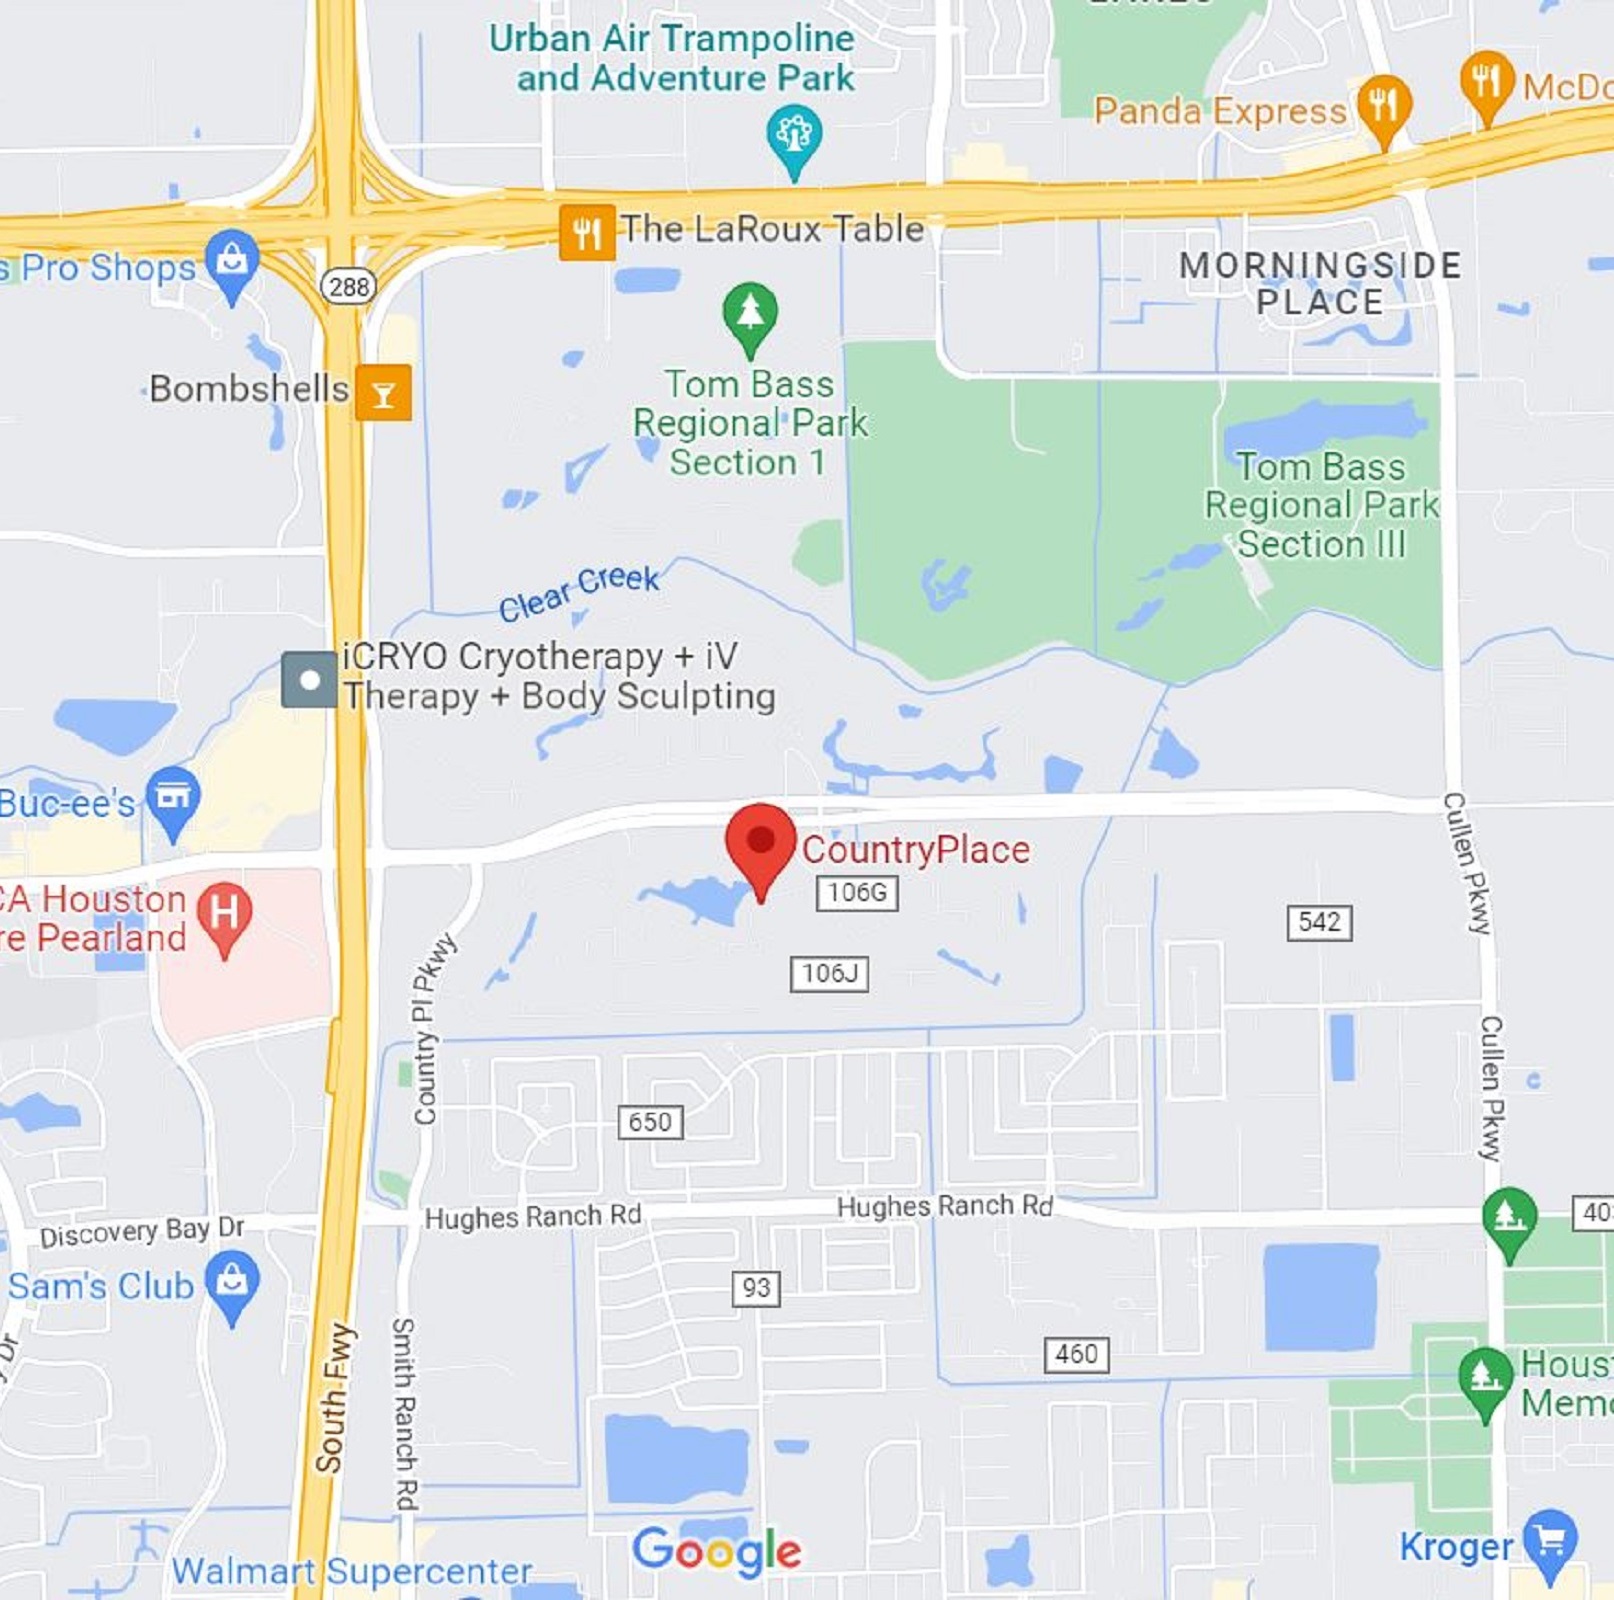 Map of Pearland: CountryPlace